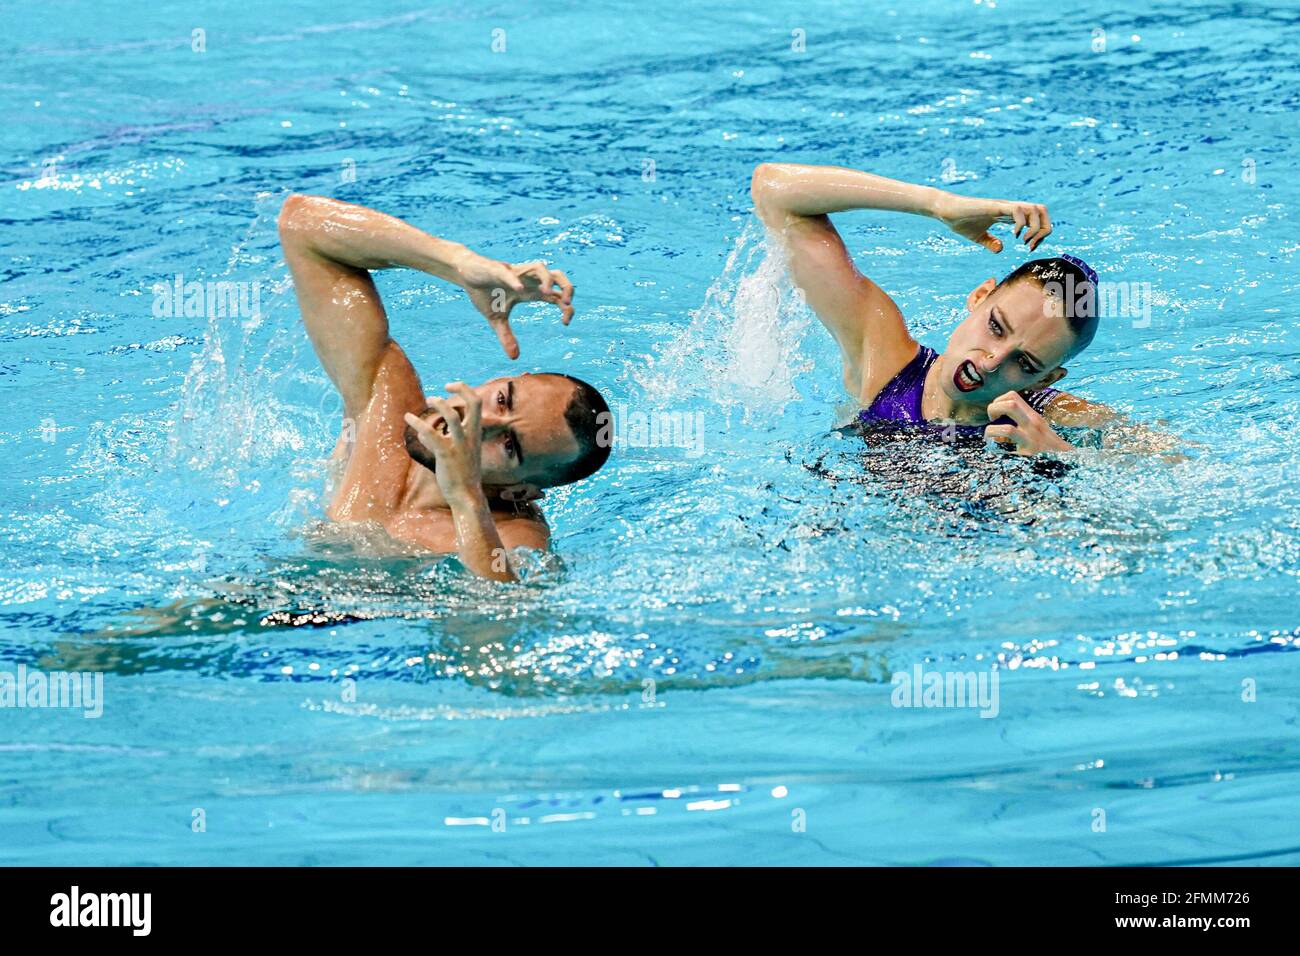 BUDAPEST, HUNGARY - MAY 10: Emma Garcia Garcia of Spain and Pau Ribes Culla of Spain competing at the Mixed Duet Tech Final during the LEN European Aquatics Championships Artistic Swimming at Duna Arena on May 10, 2021 in Budapest, Hungary (Photo by Andre Weening/Orange Pictures) Stock Photo